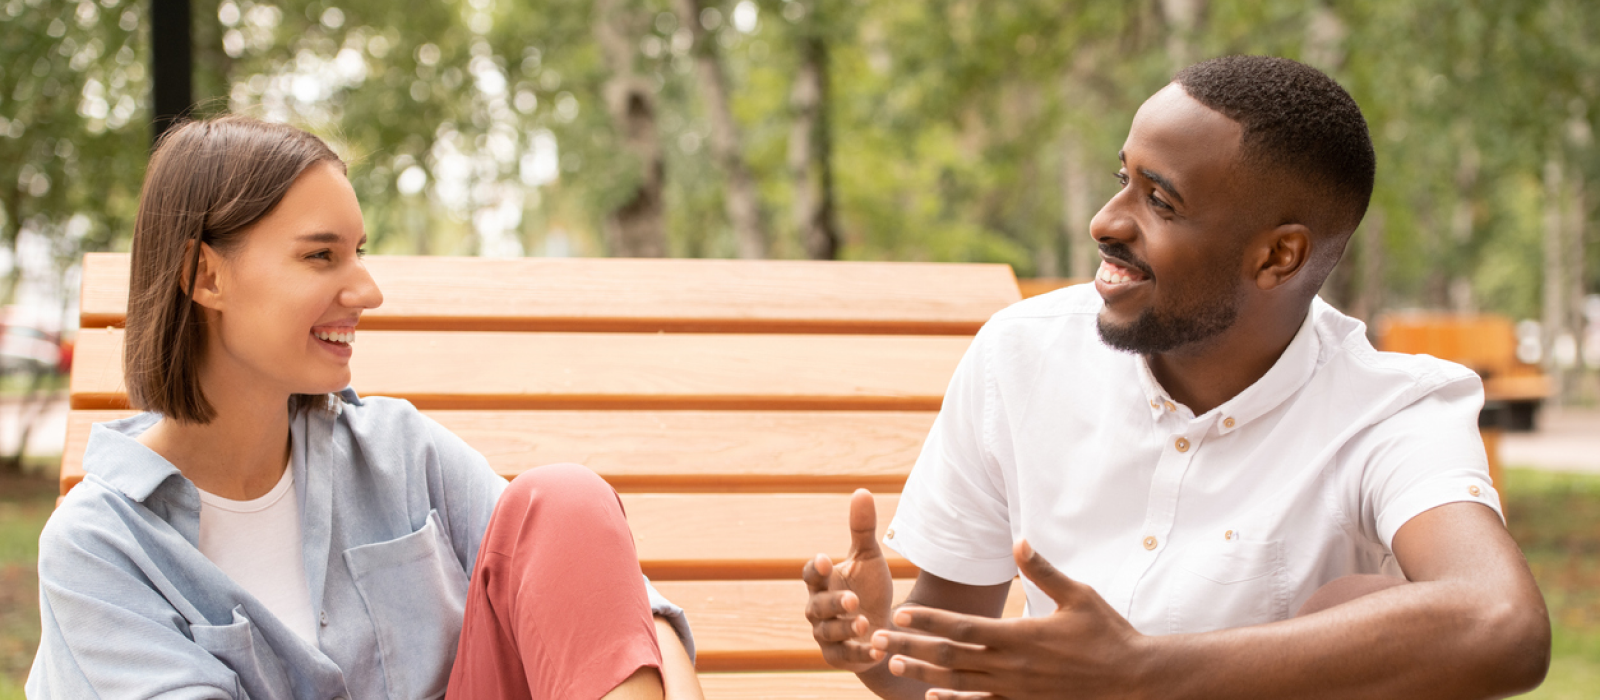 A woman and a man sit on a park bench. The male has attachment issues and he is talking to his good friend that he has a healthy relationship with.